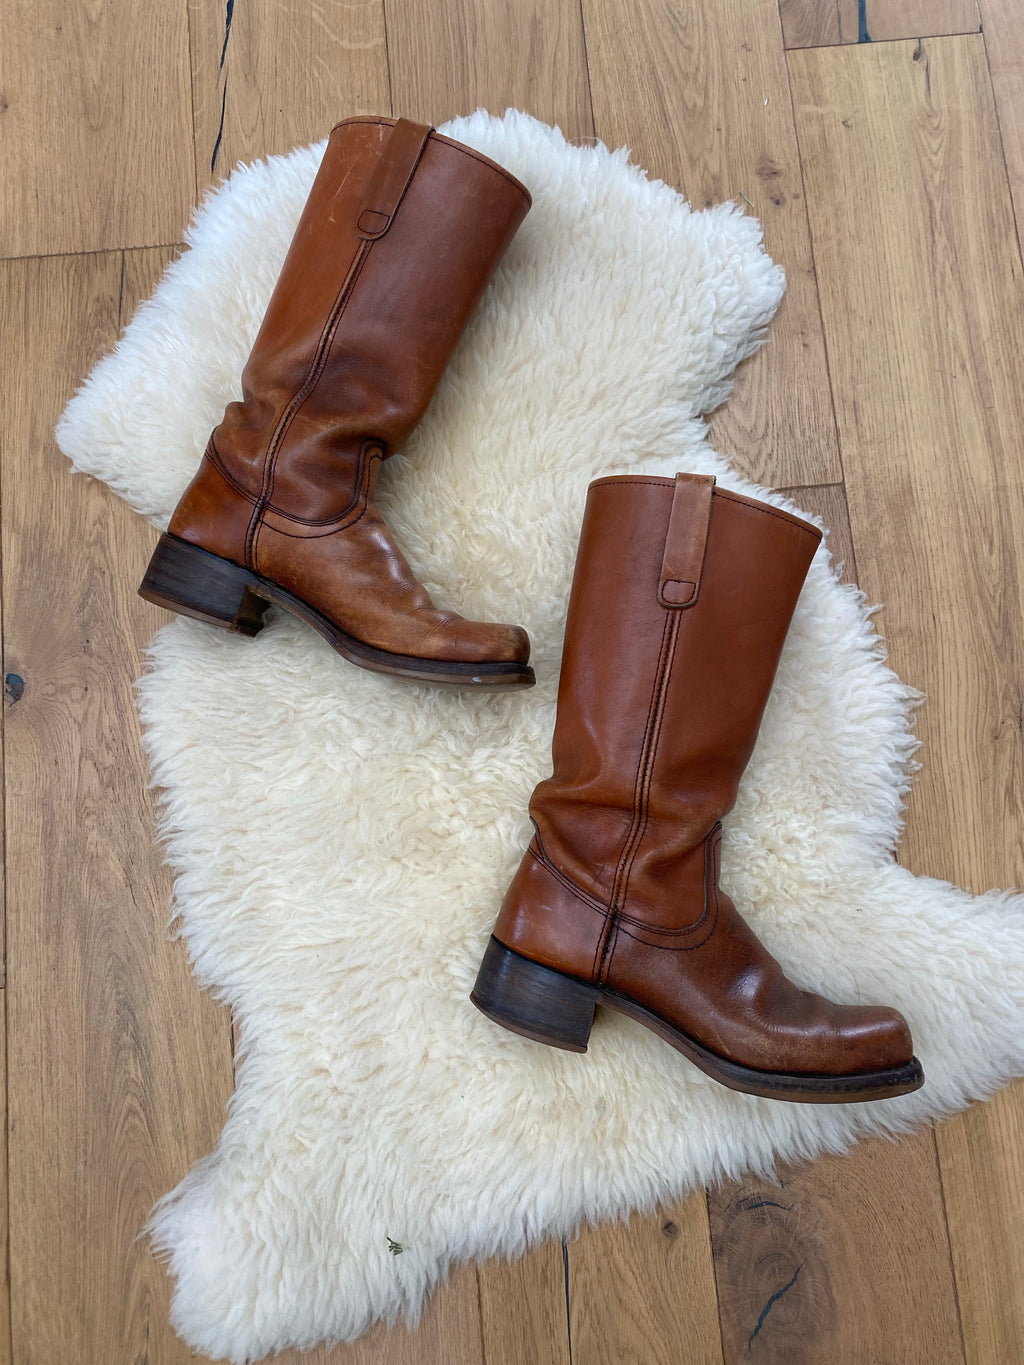 Vintage Leather Boots (9.5)